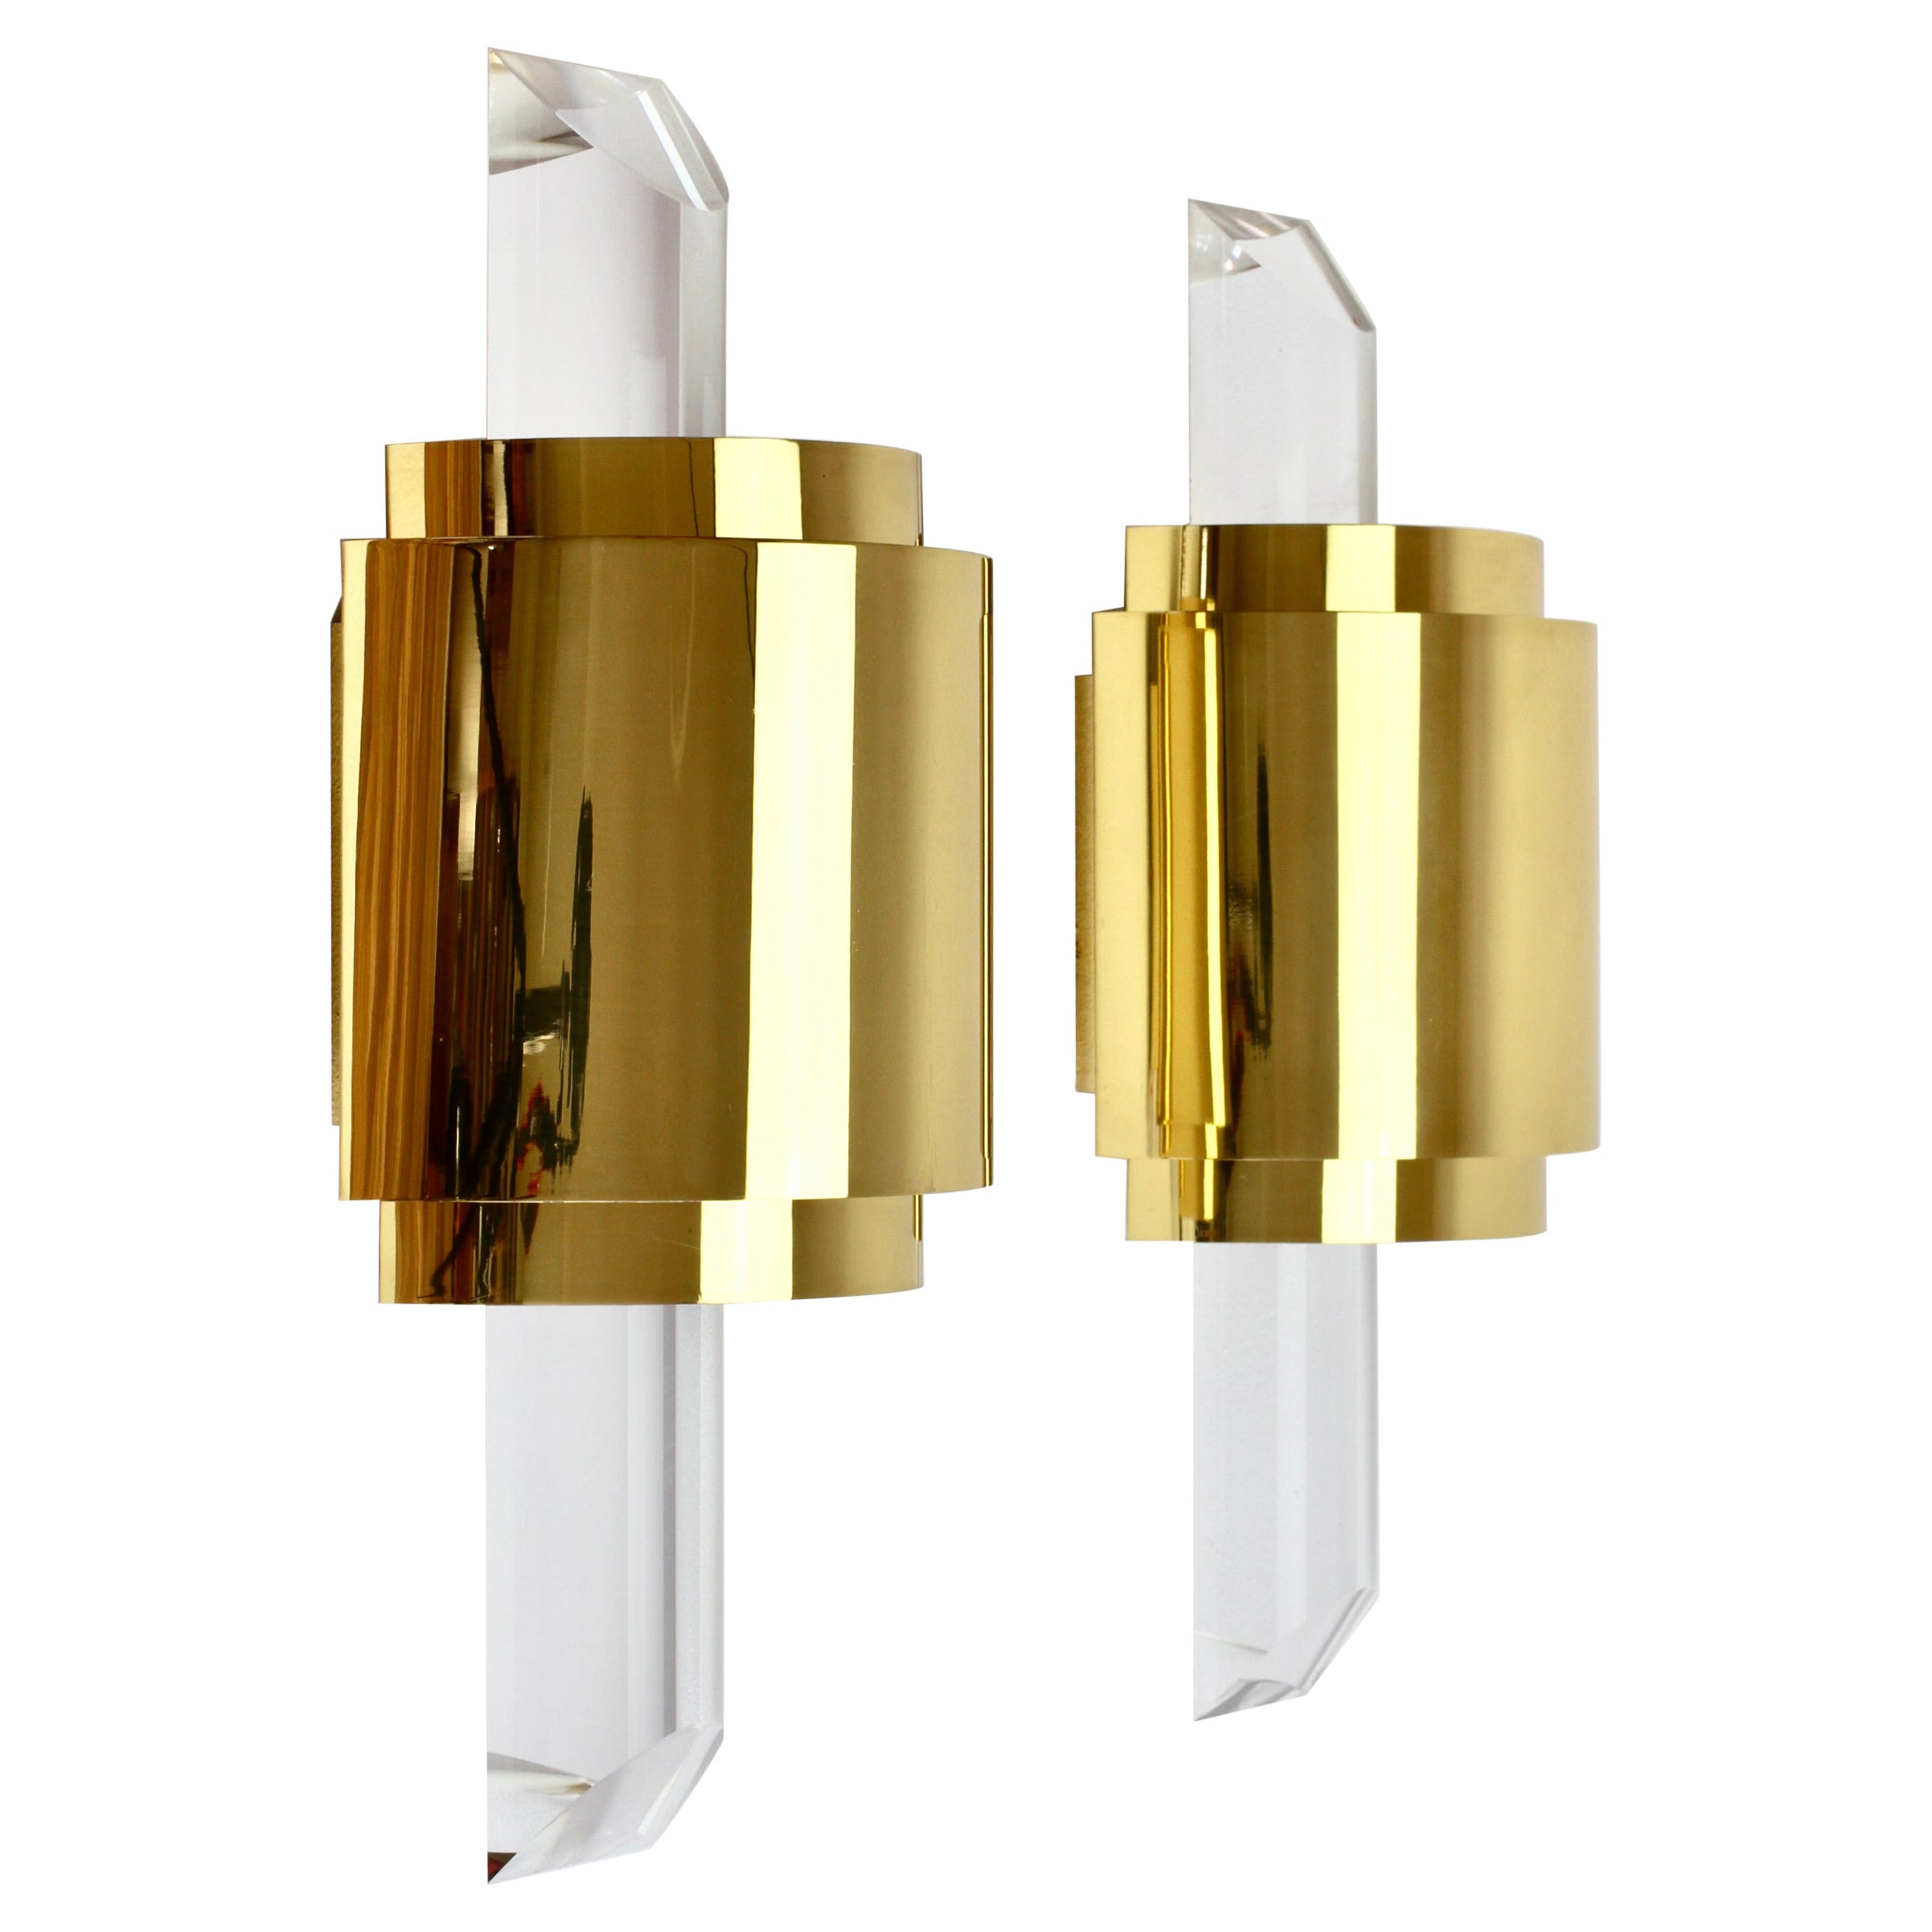 Large Hollywood Regency Lucite and Brass Wall Lights or Sconces, circa 1970s